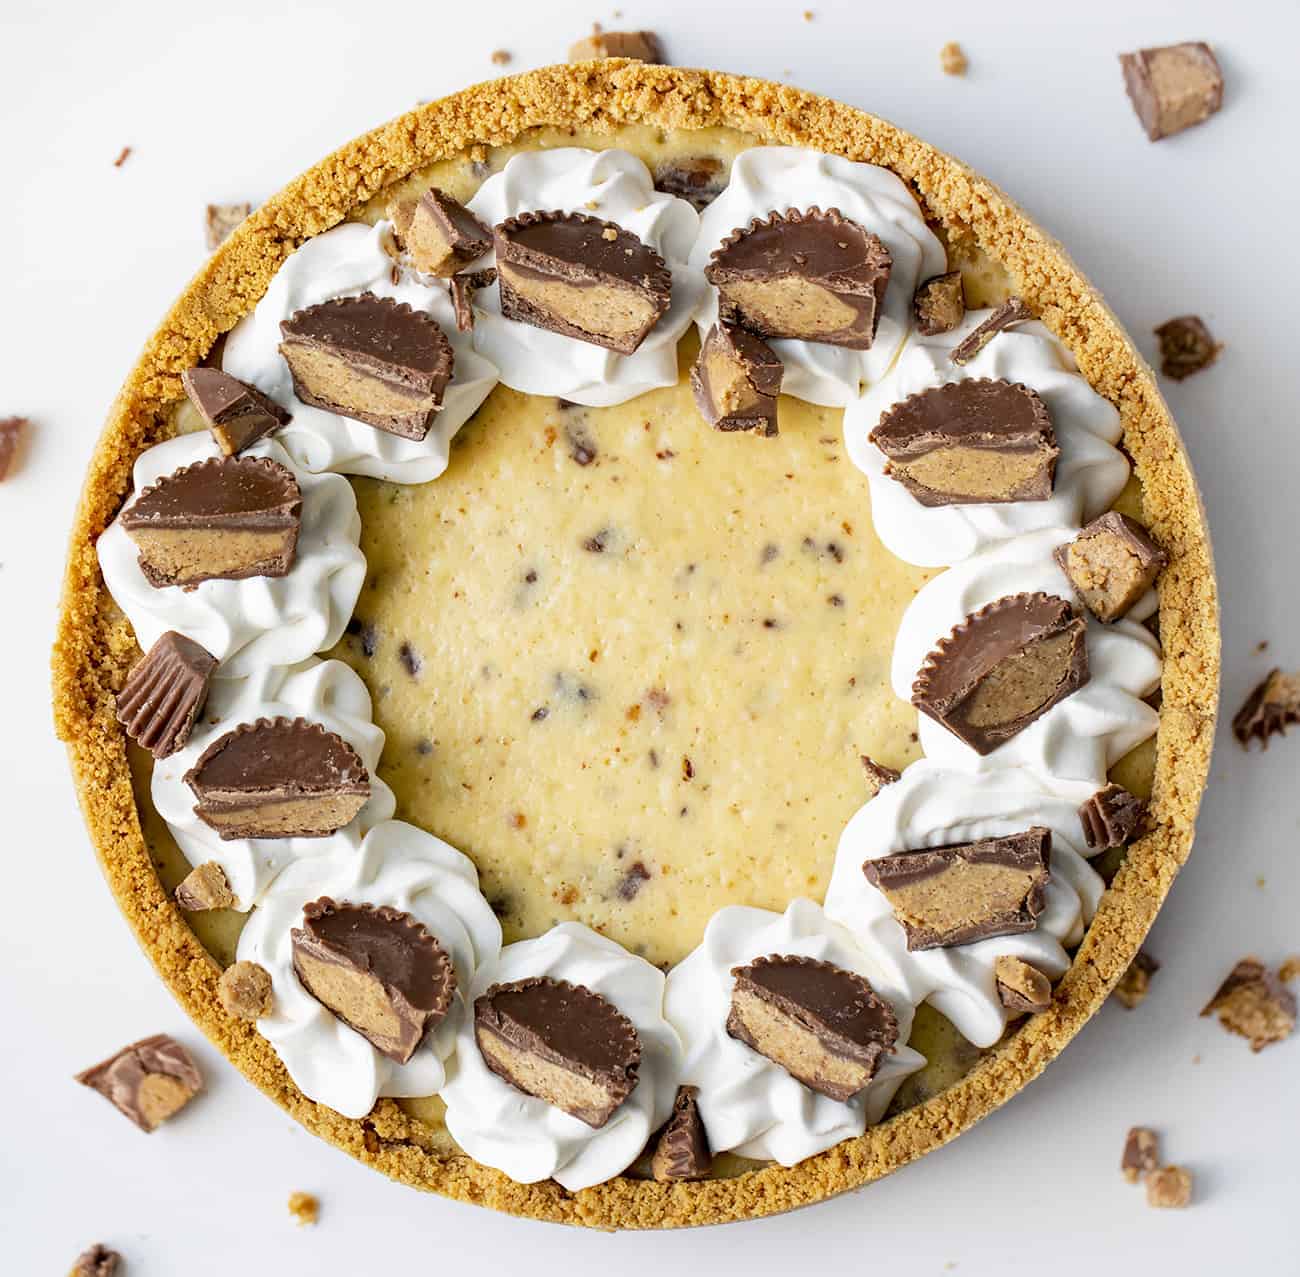 Overhead Image of Reese's Cheesecake with Peanut Butter Cup Pieces Scattered Around